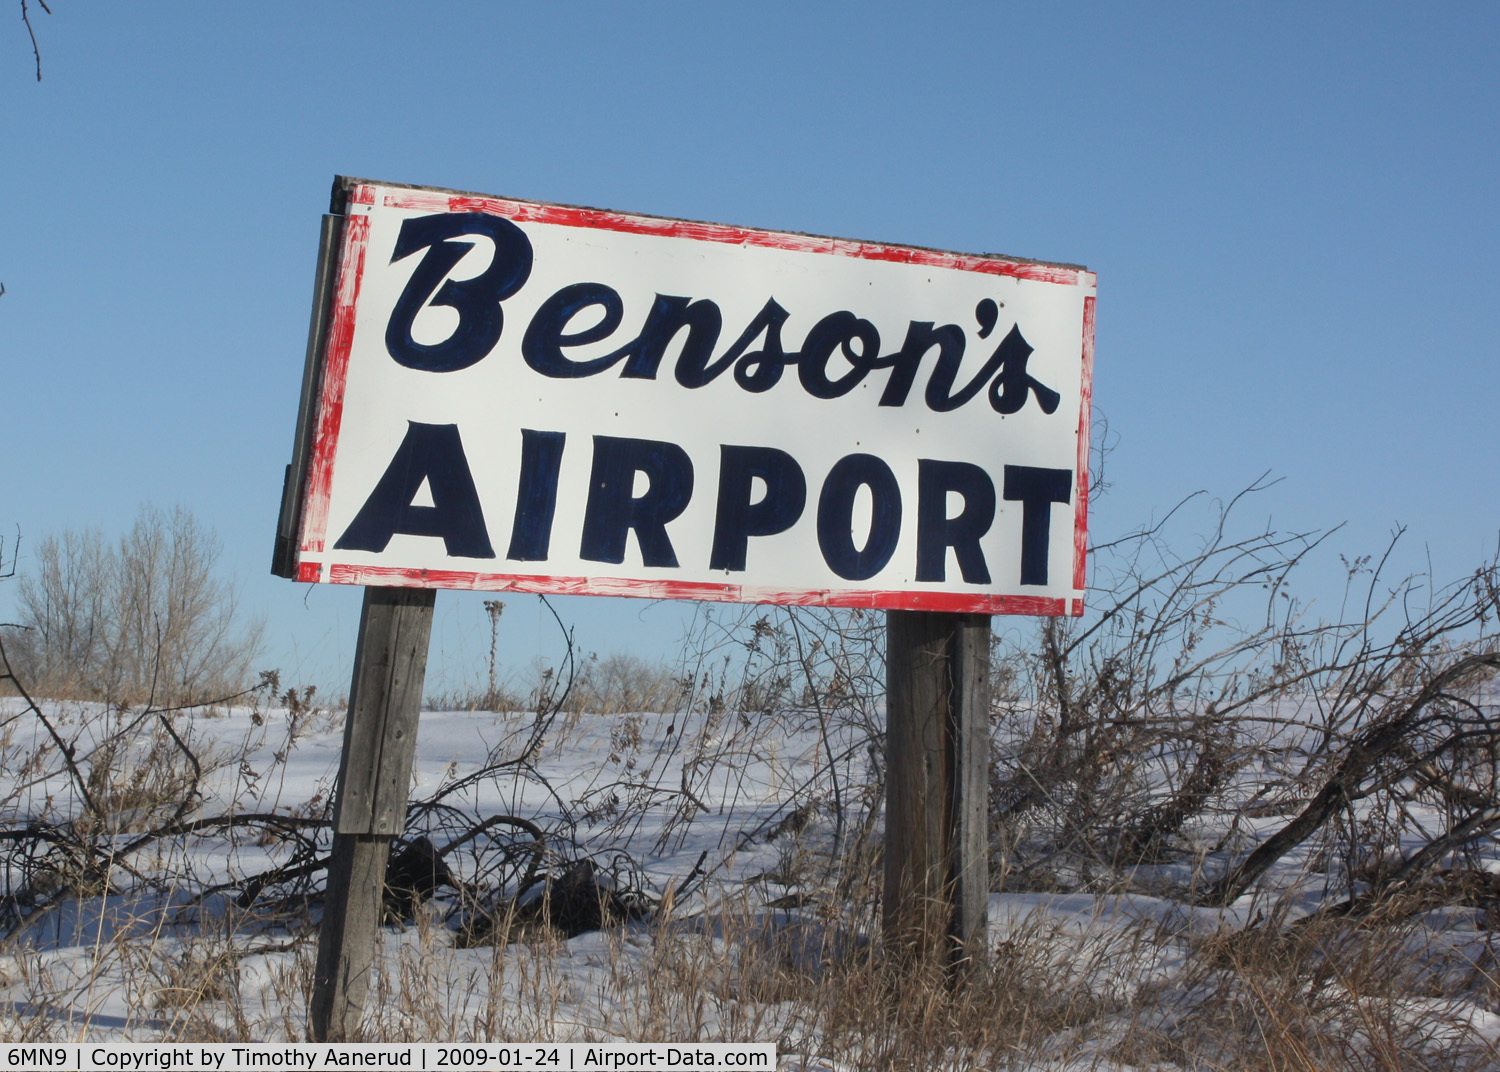 Benson Airport (6MN9) - The airport road sign